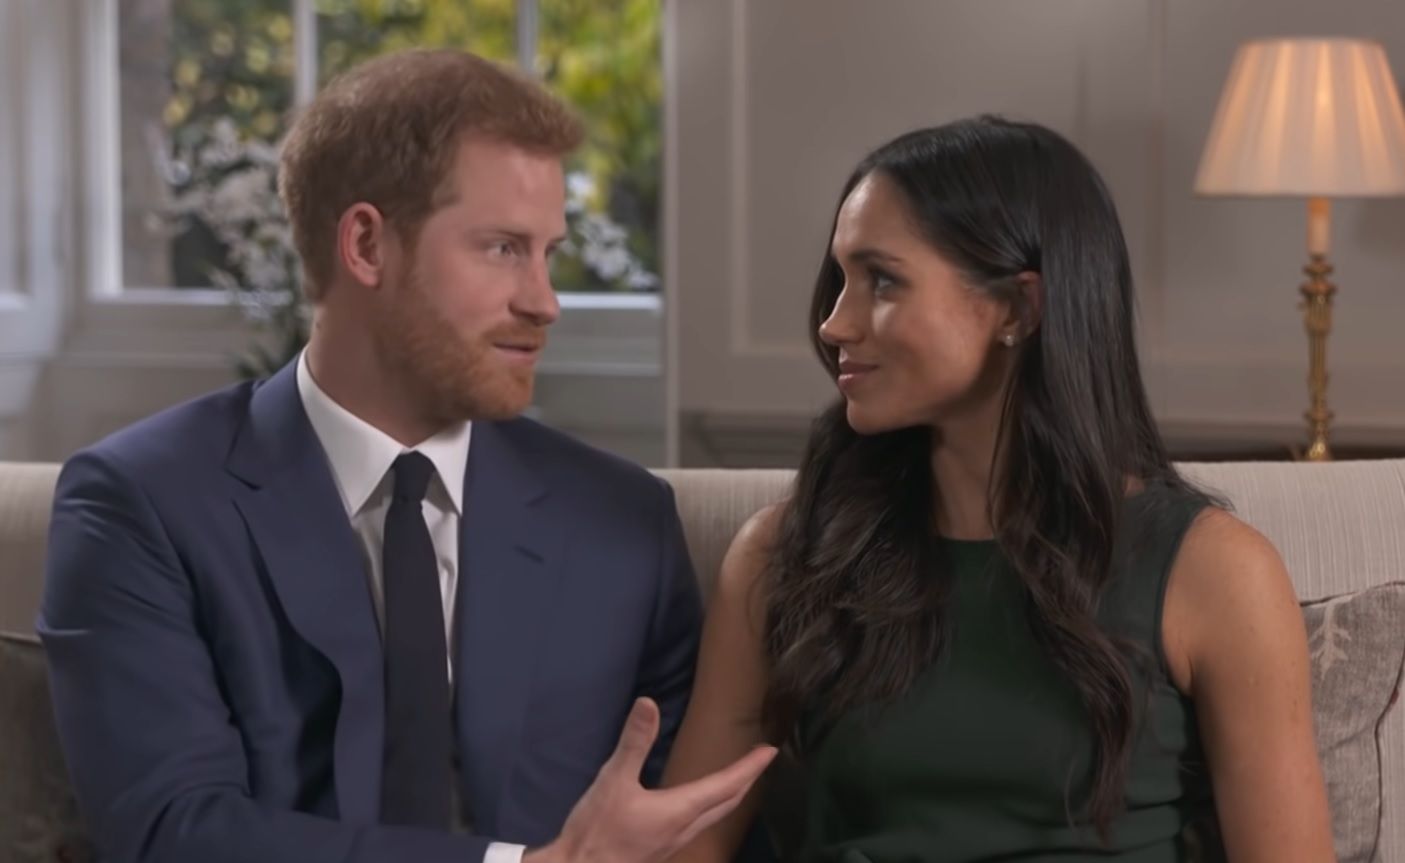 prince-harry-shock-meghan-markles-husband-attacked-by-trolls-on-social-media-person-behind-duchess-false-pregnancy-theories-revealed